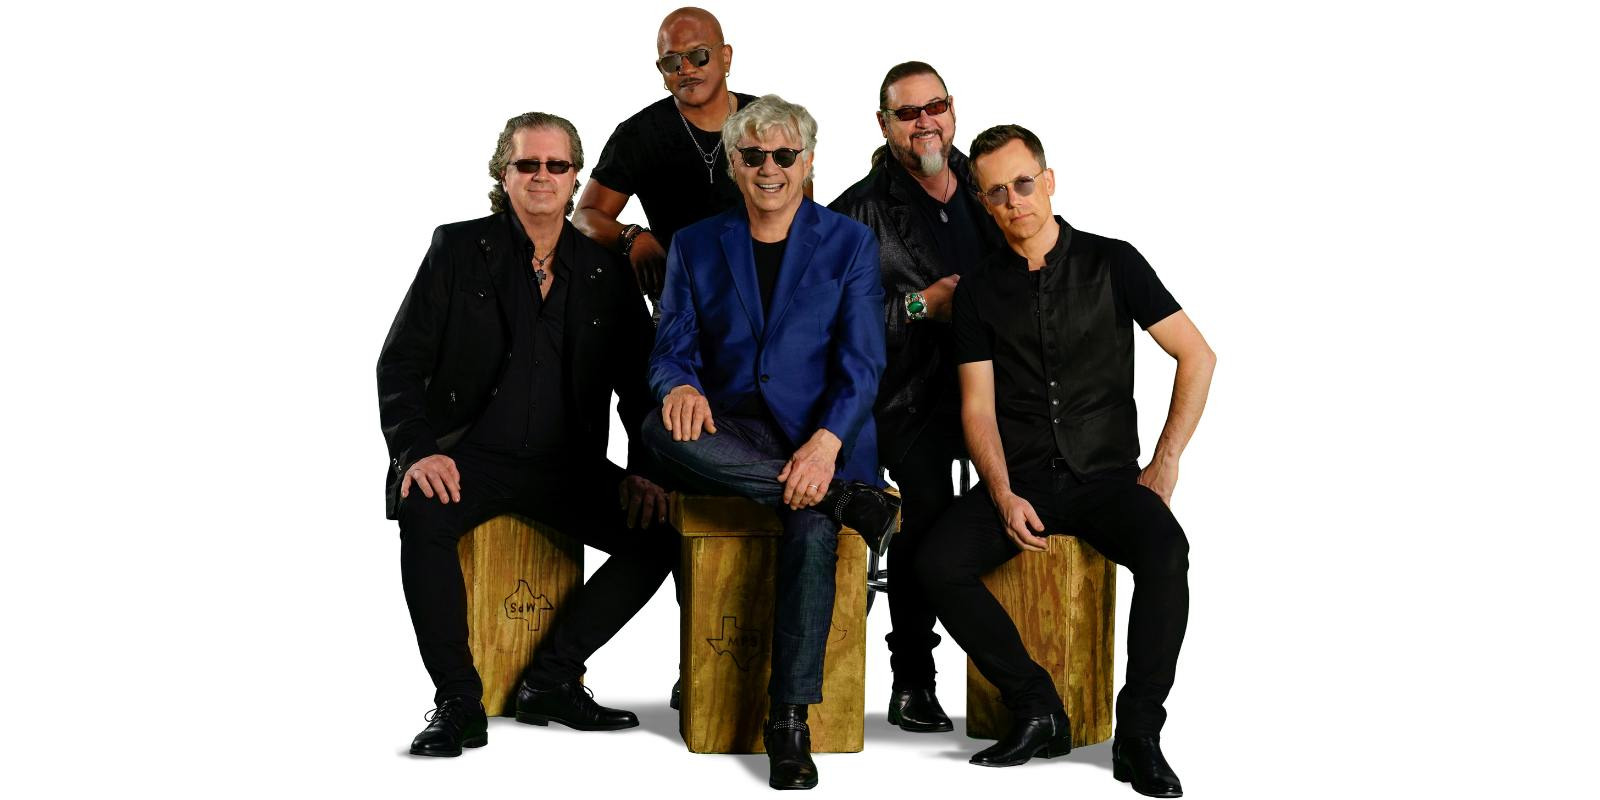 All members of the band are sat in a tight circle on wooden stools. Steve Miller is in the middle,smiling brightly, with a dark blue blazer while all other members are in all black. Everyone is in sunglasses.